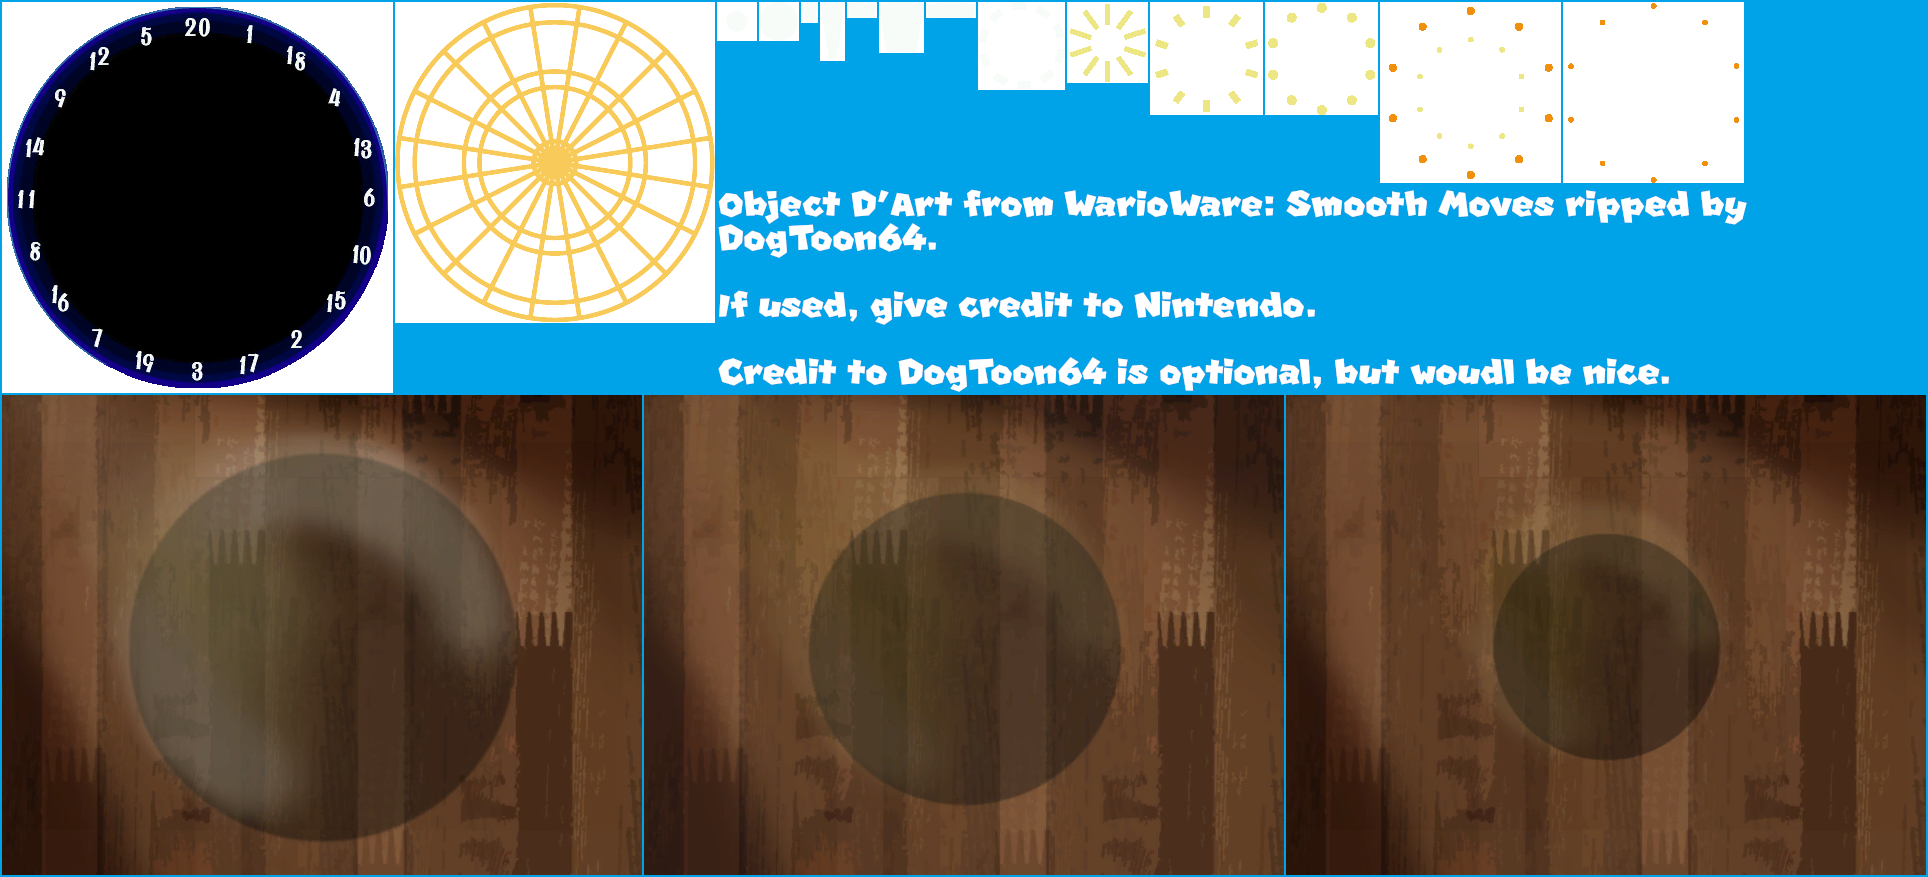 WarioWare: Smooth Moves - Object D'Art